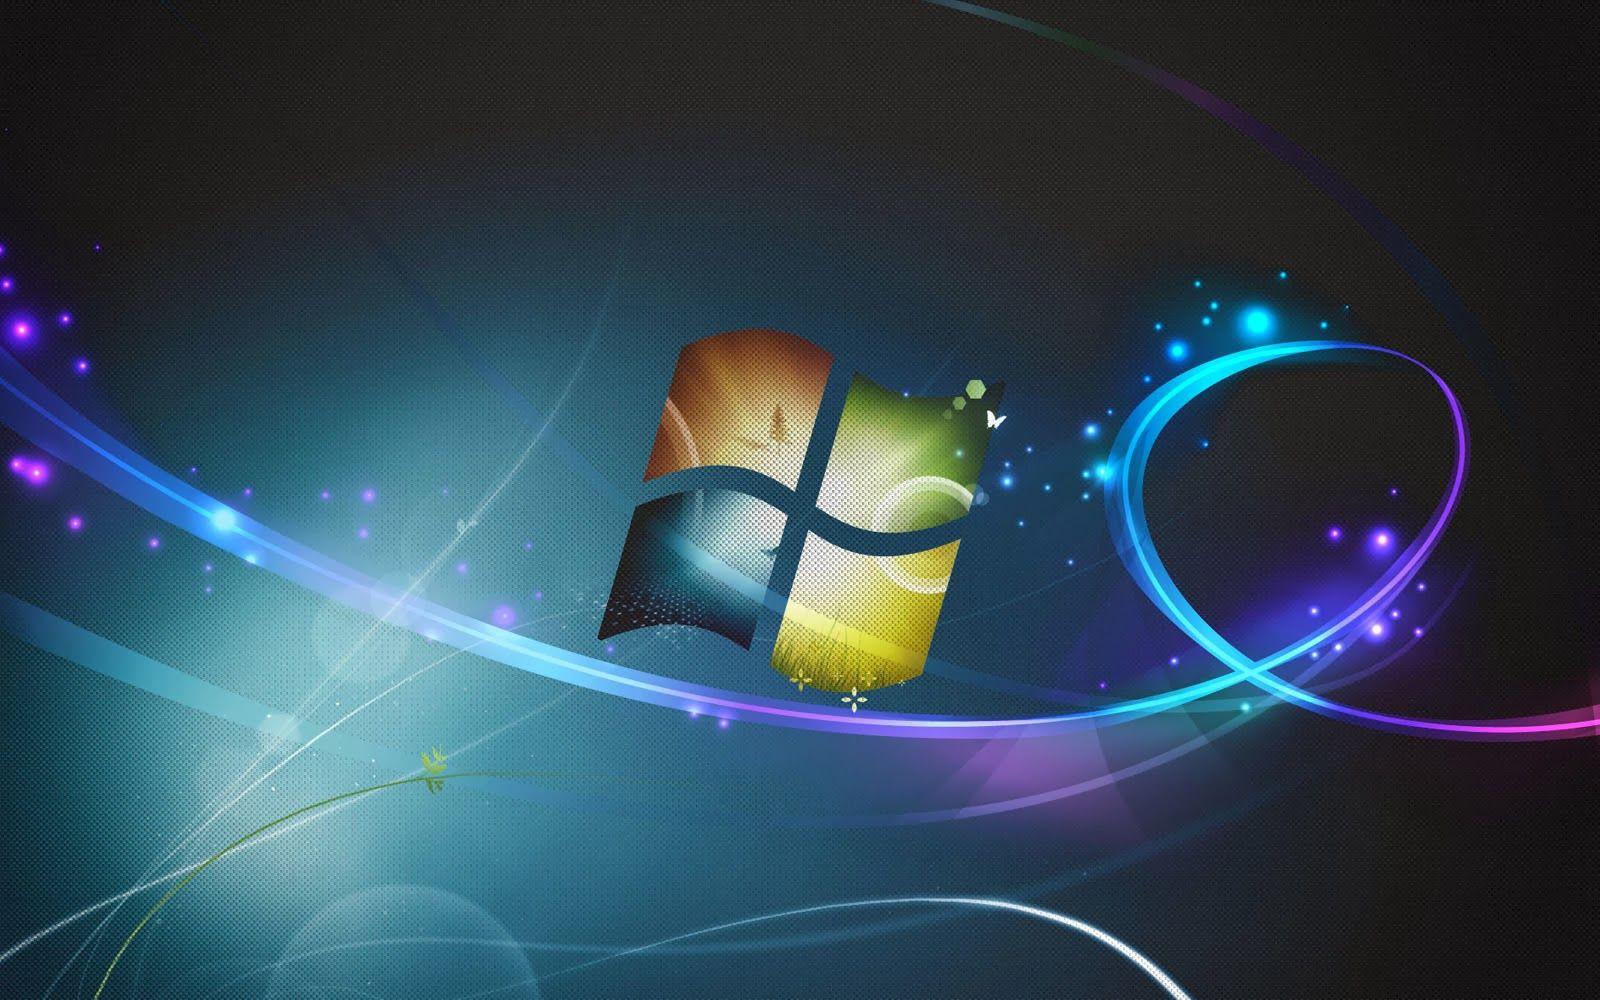 Abstract Windows Wallpapers - Top Free Abstract Windows Backgrounds ...